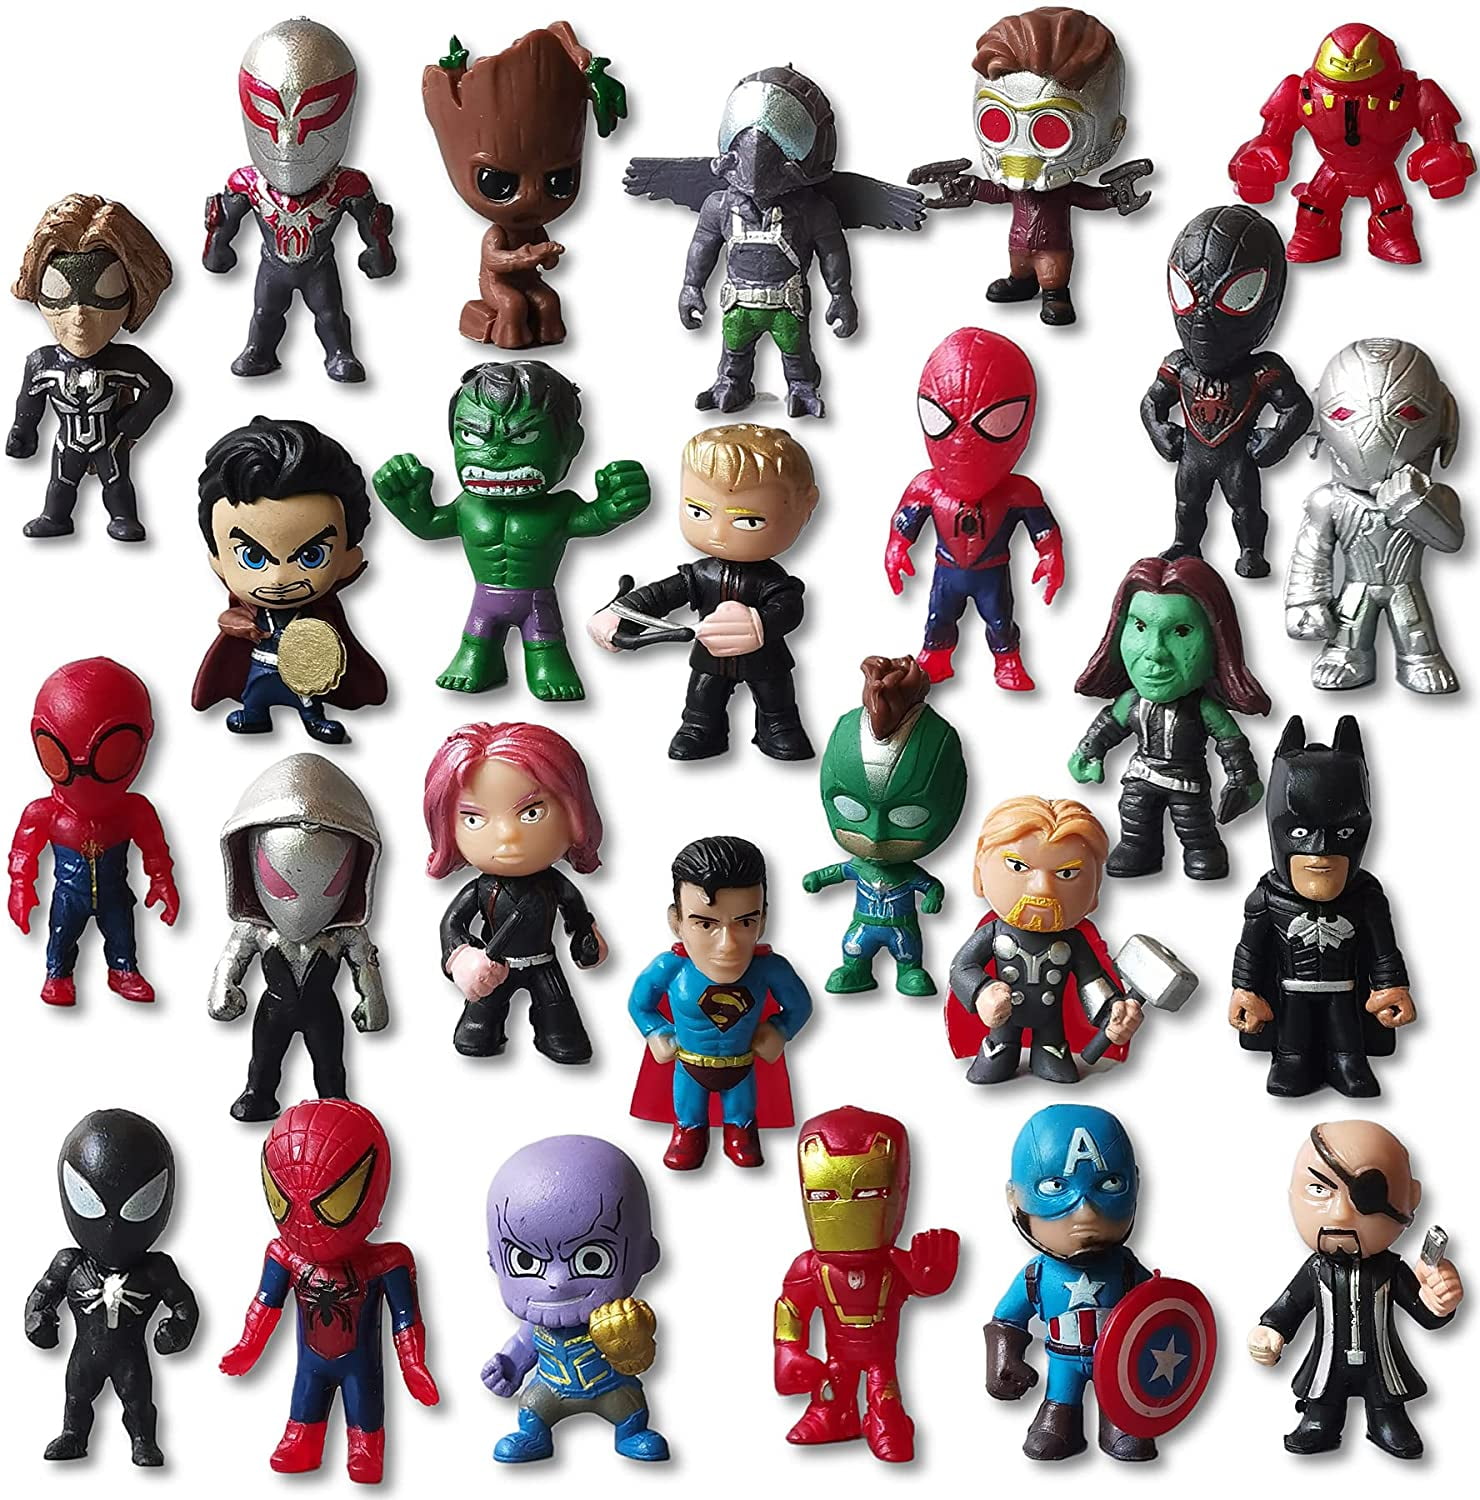 Super Hero Action Sets Mini Superheroes Figures for Boys Ornaments Toys，Small Superhero Figure Birthday Party Favors Cake Decoration Cupcake Topper Supplies 20 Pieces 